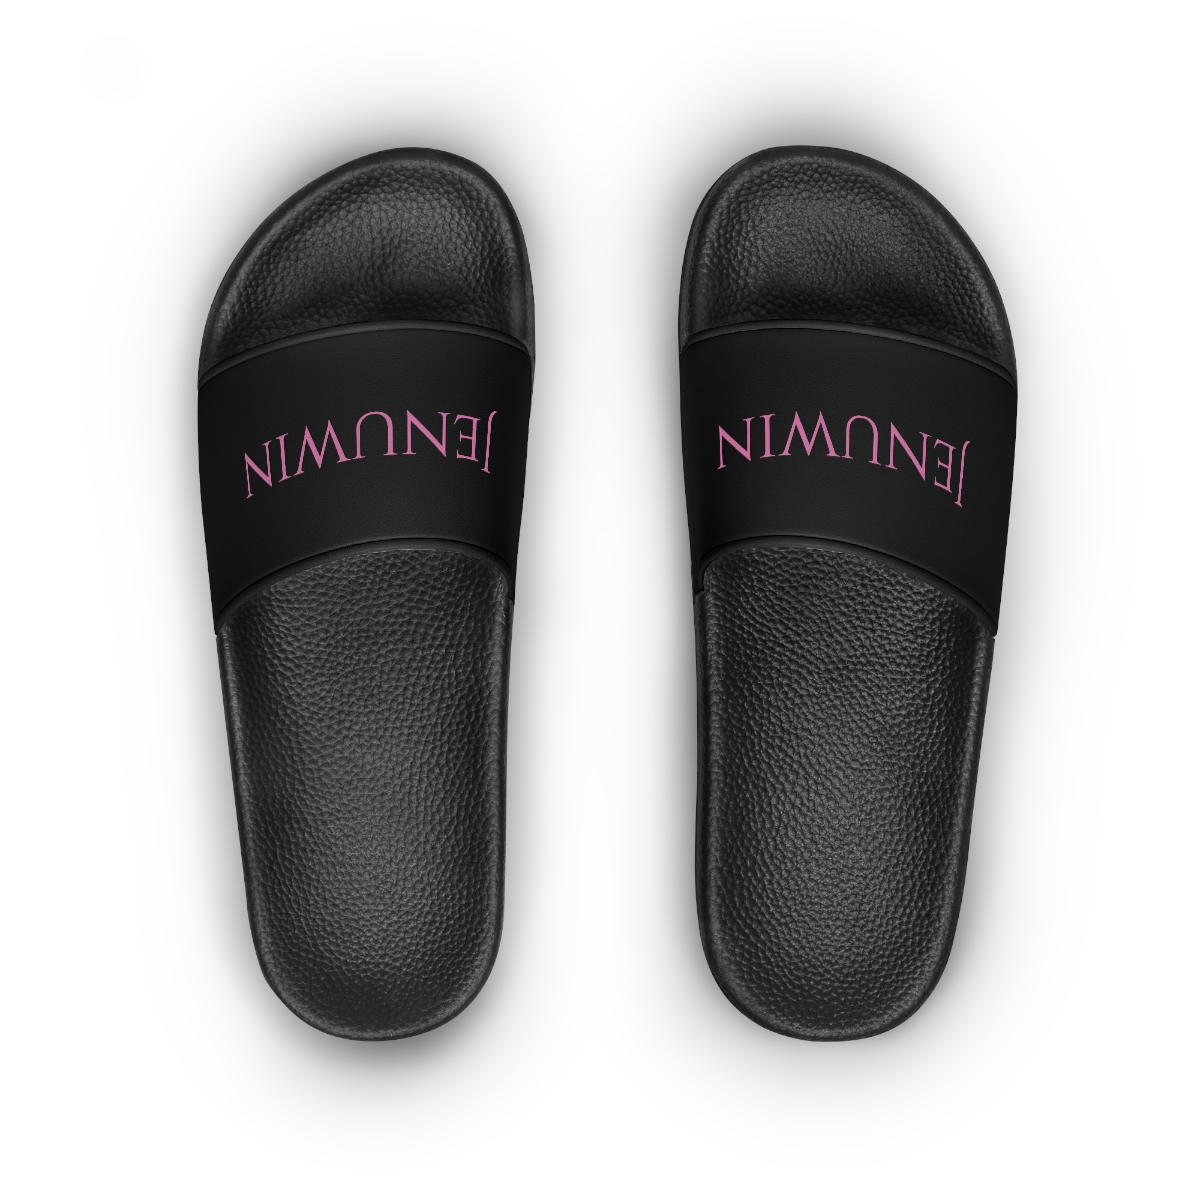 A pair of black sandals with the word " balmain " written on them.